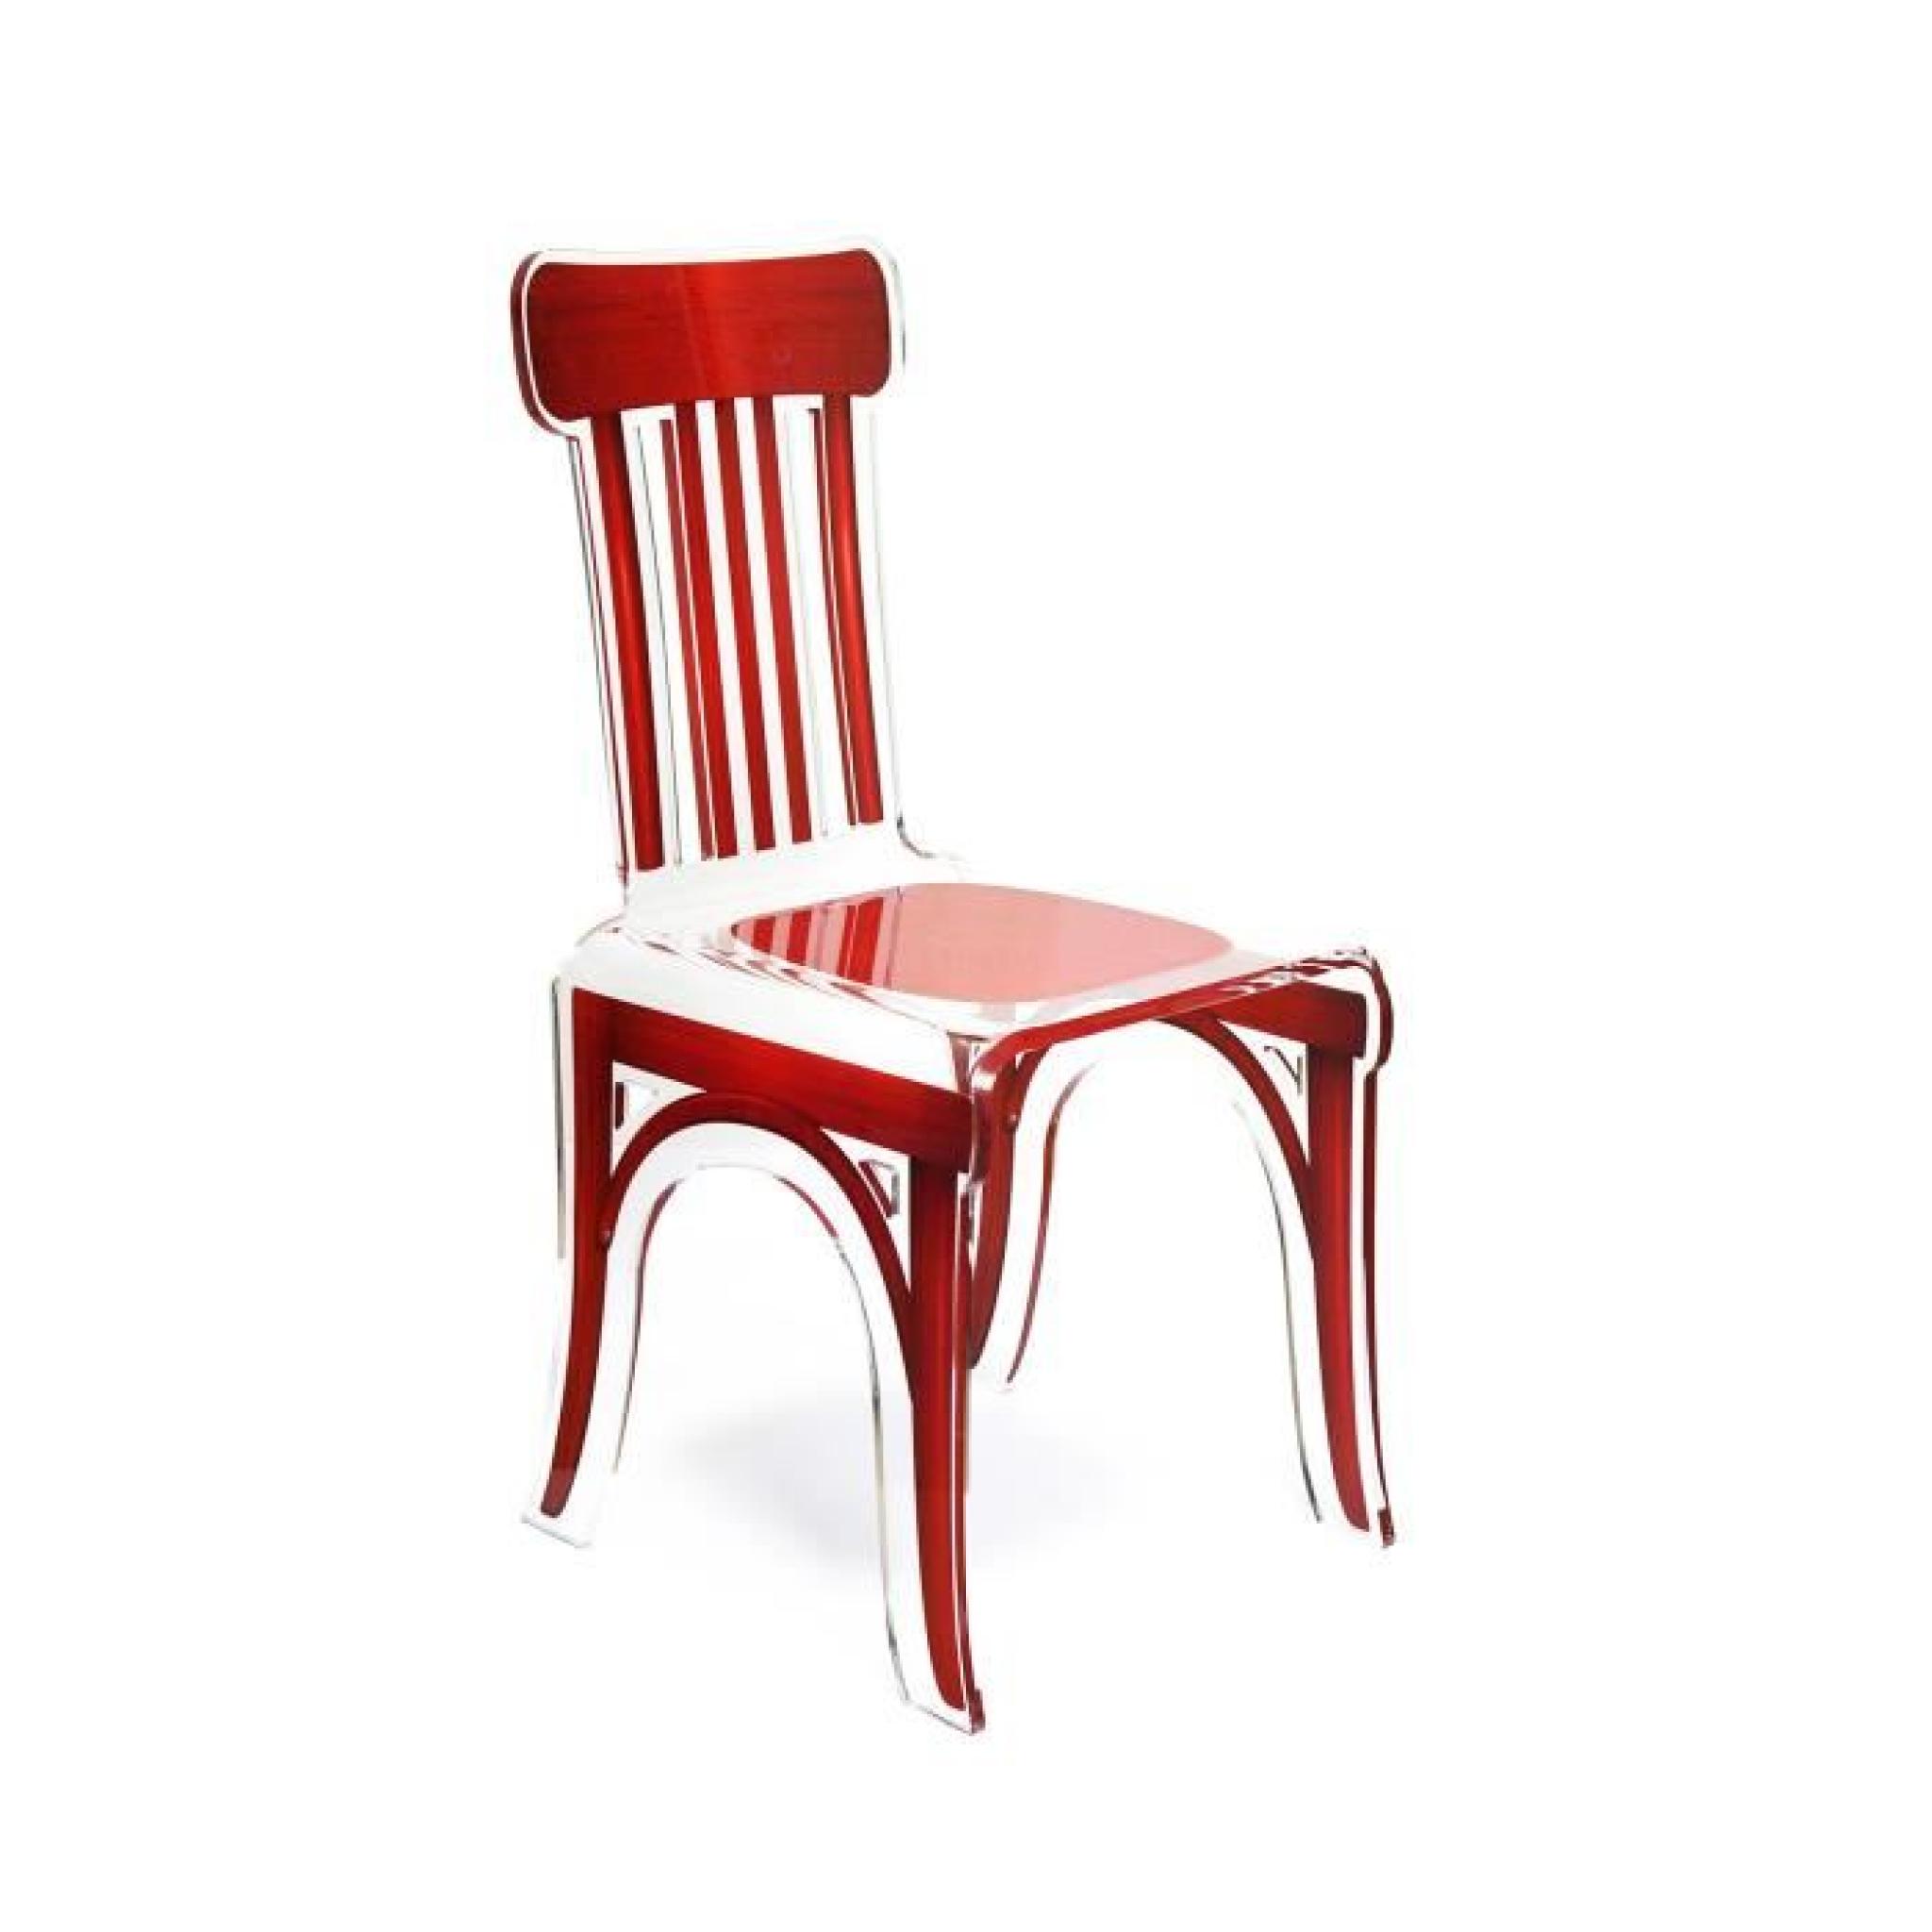 Acrila - Chaise Bistrot - Rouge pas cher